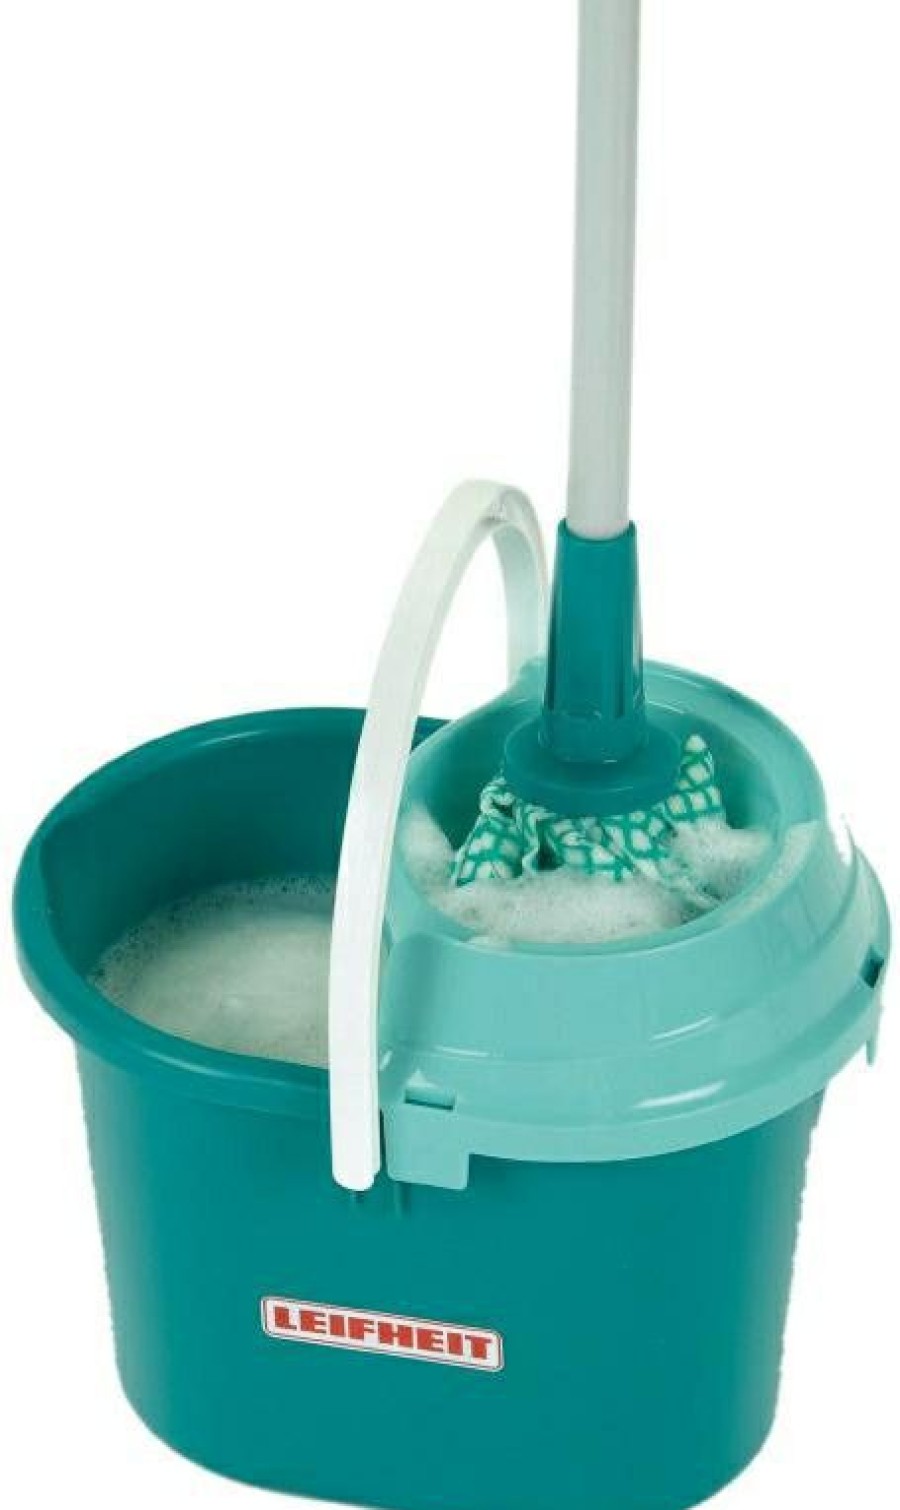 For Boys MPK Toys, Mopping Bucket With Mop Leifheit